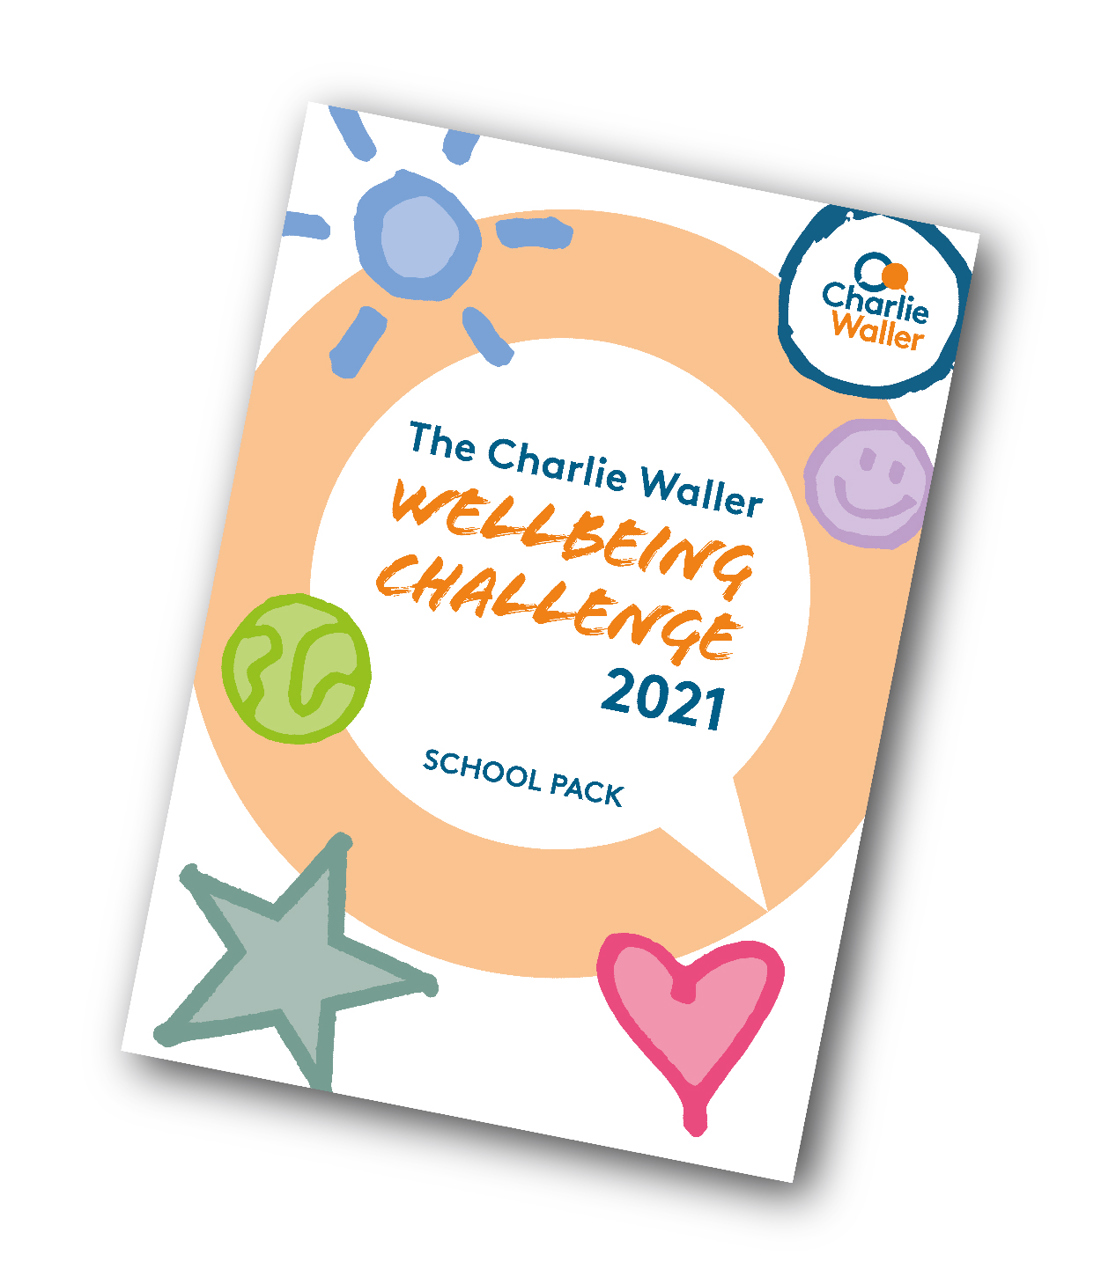 Wellbeing Challenge cover